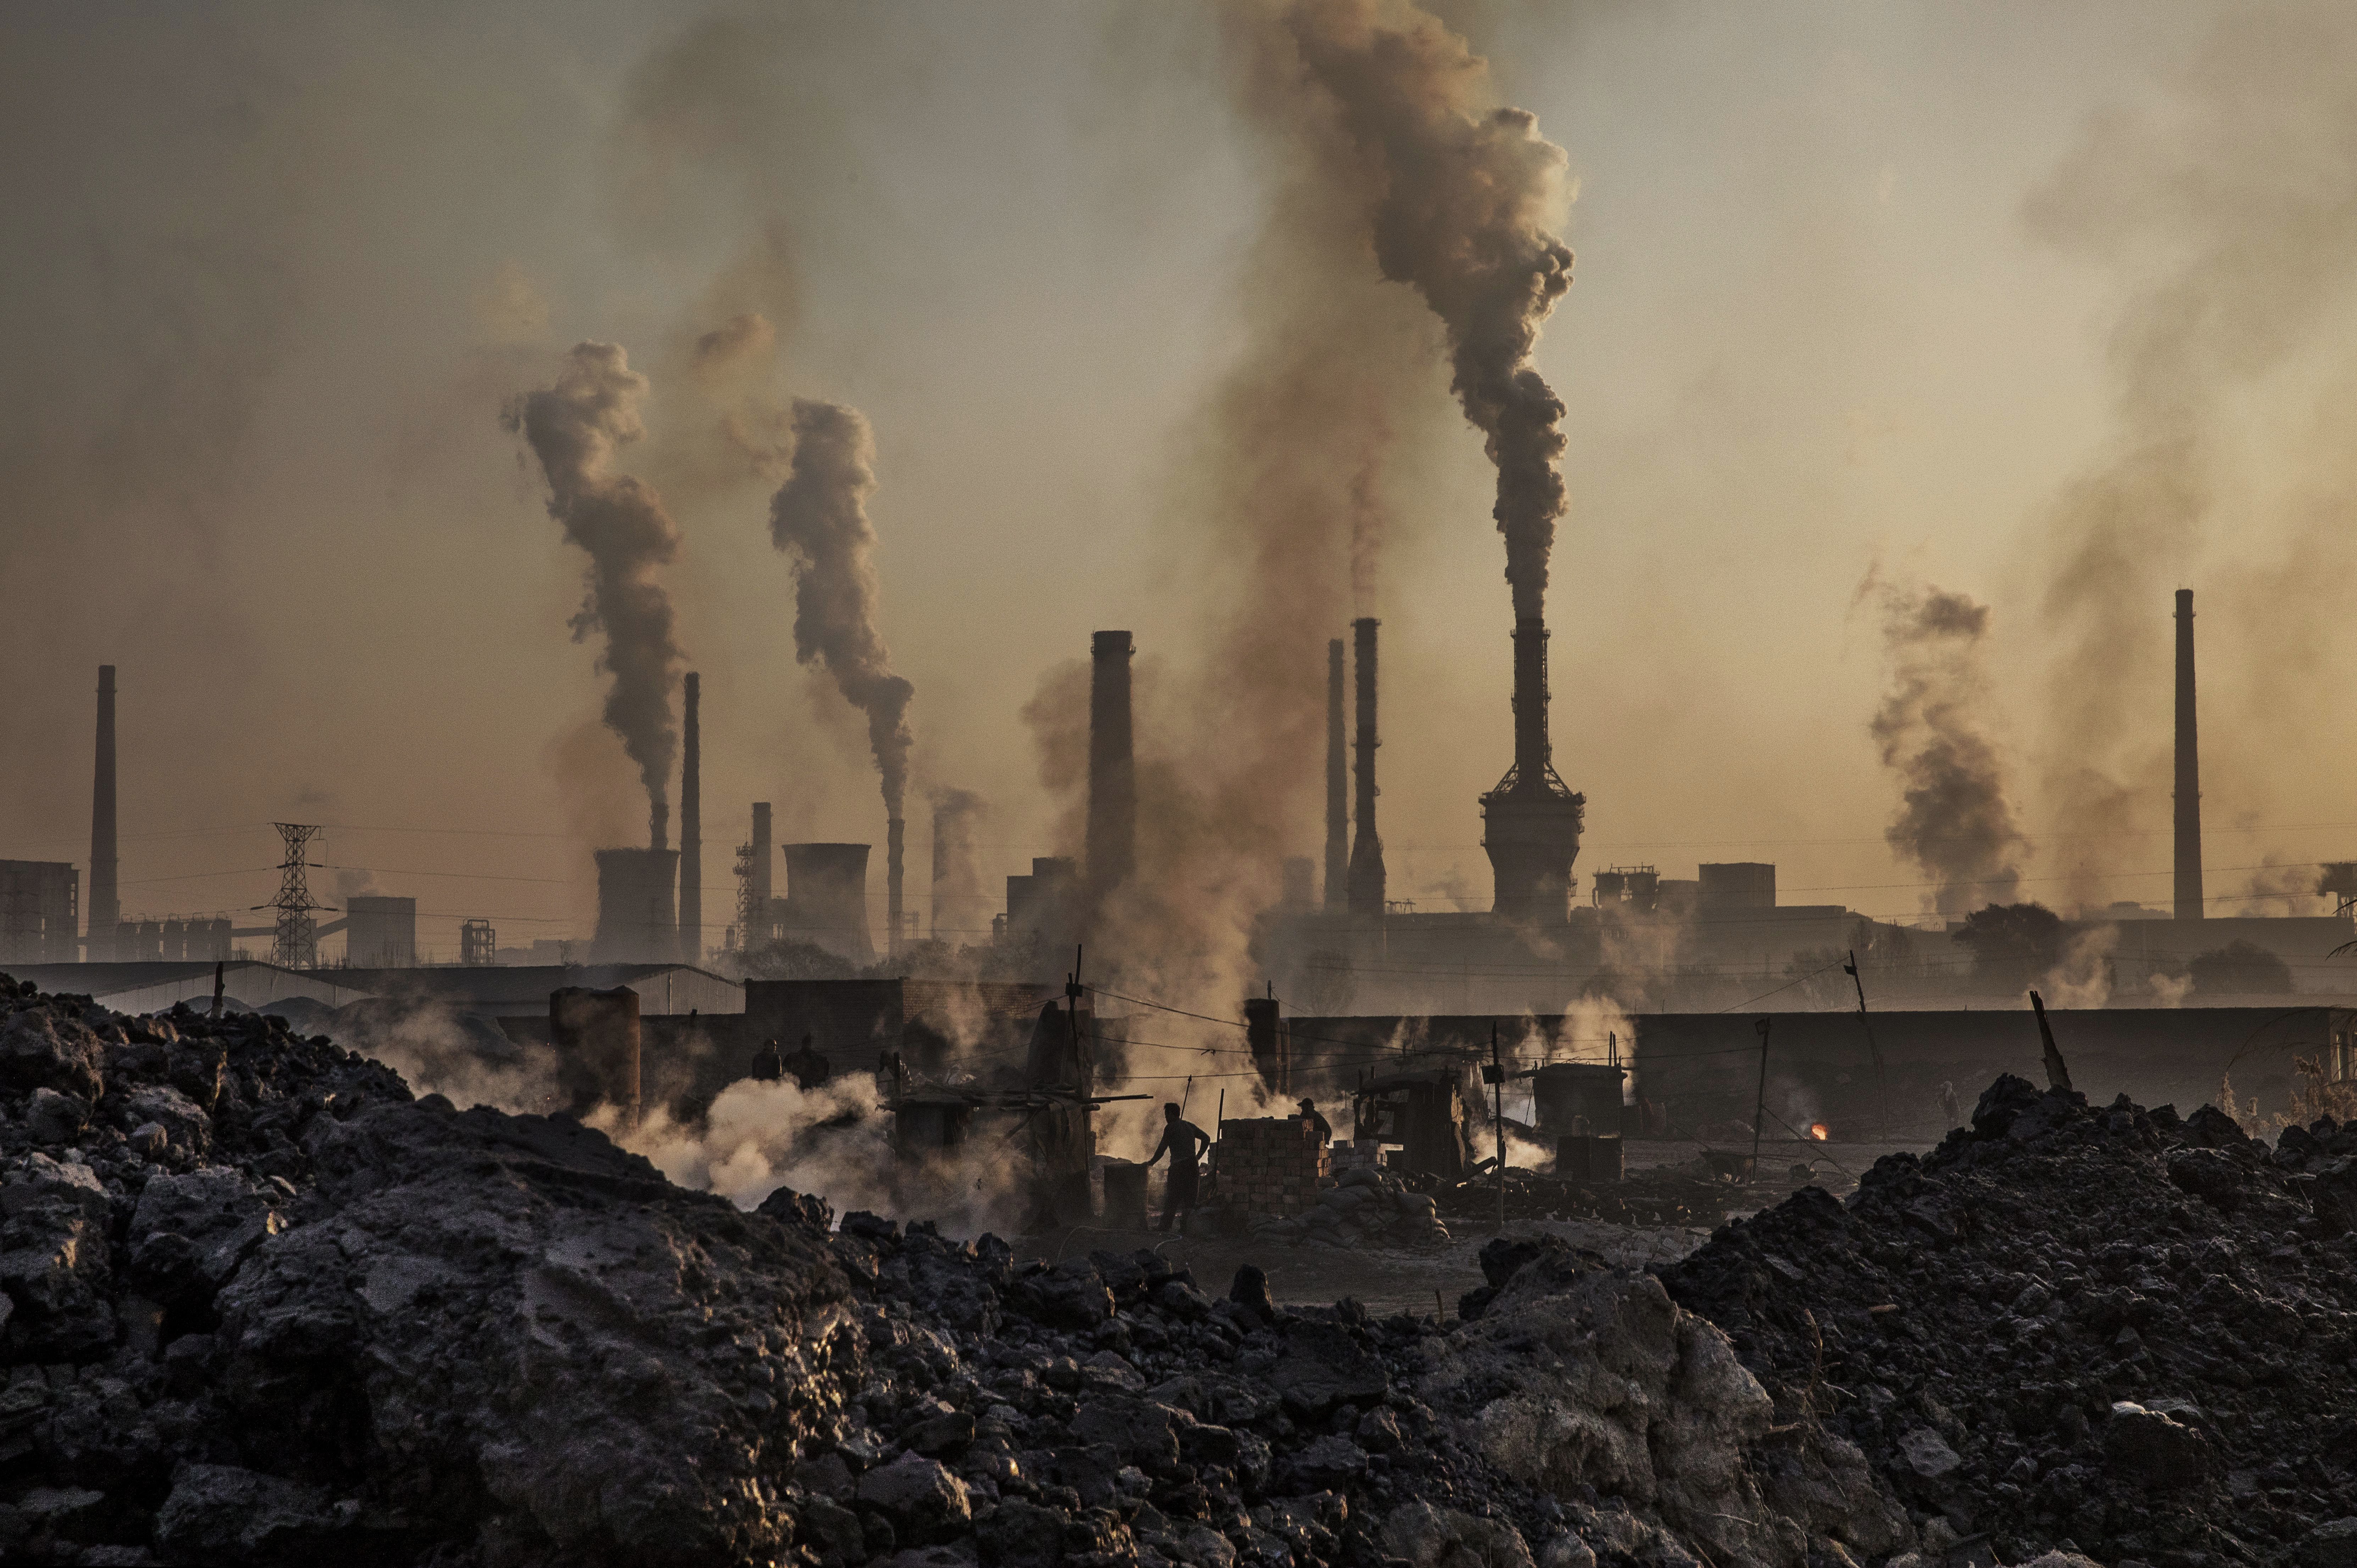 Smoke billows from a large steel plant on November 4, 2016 in Inner Mongolia, China. Over the industrial era, the amount of carbon dioxide in the atmosphere has increased by about 40%, according to the U.S. Global Change Research Program.